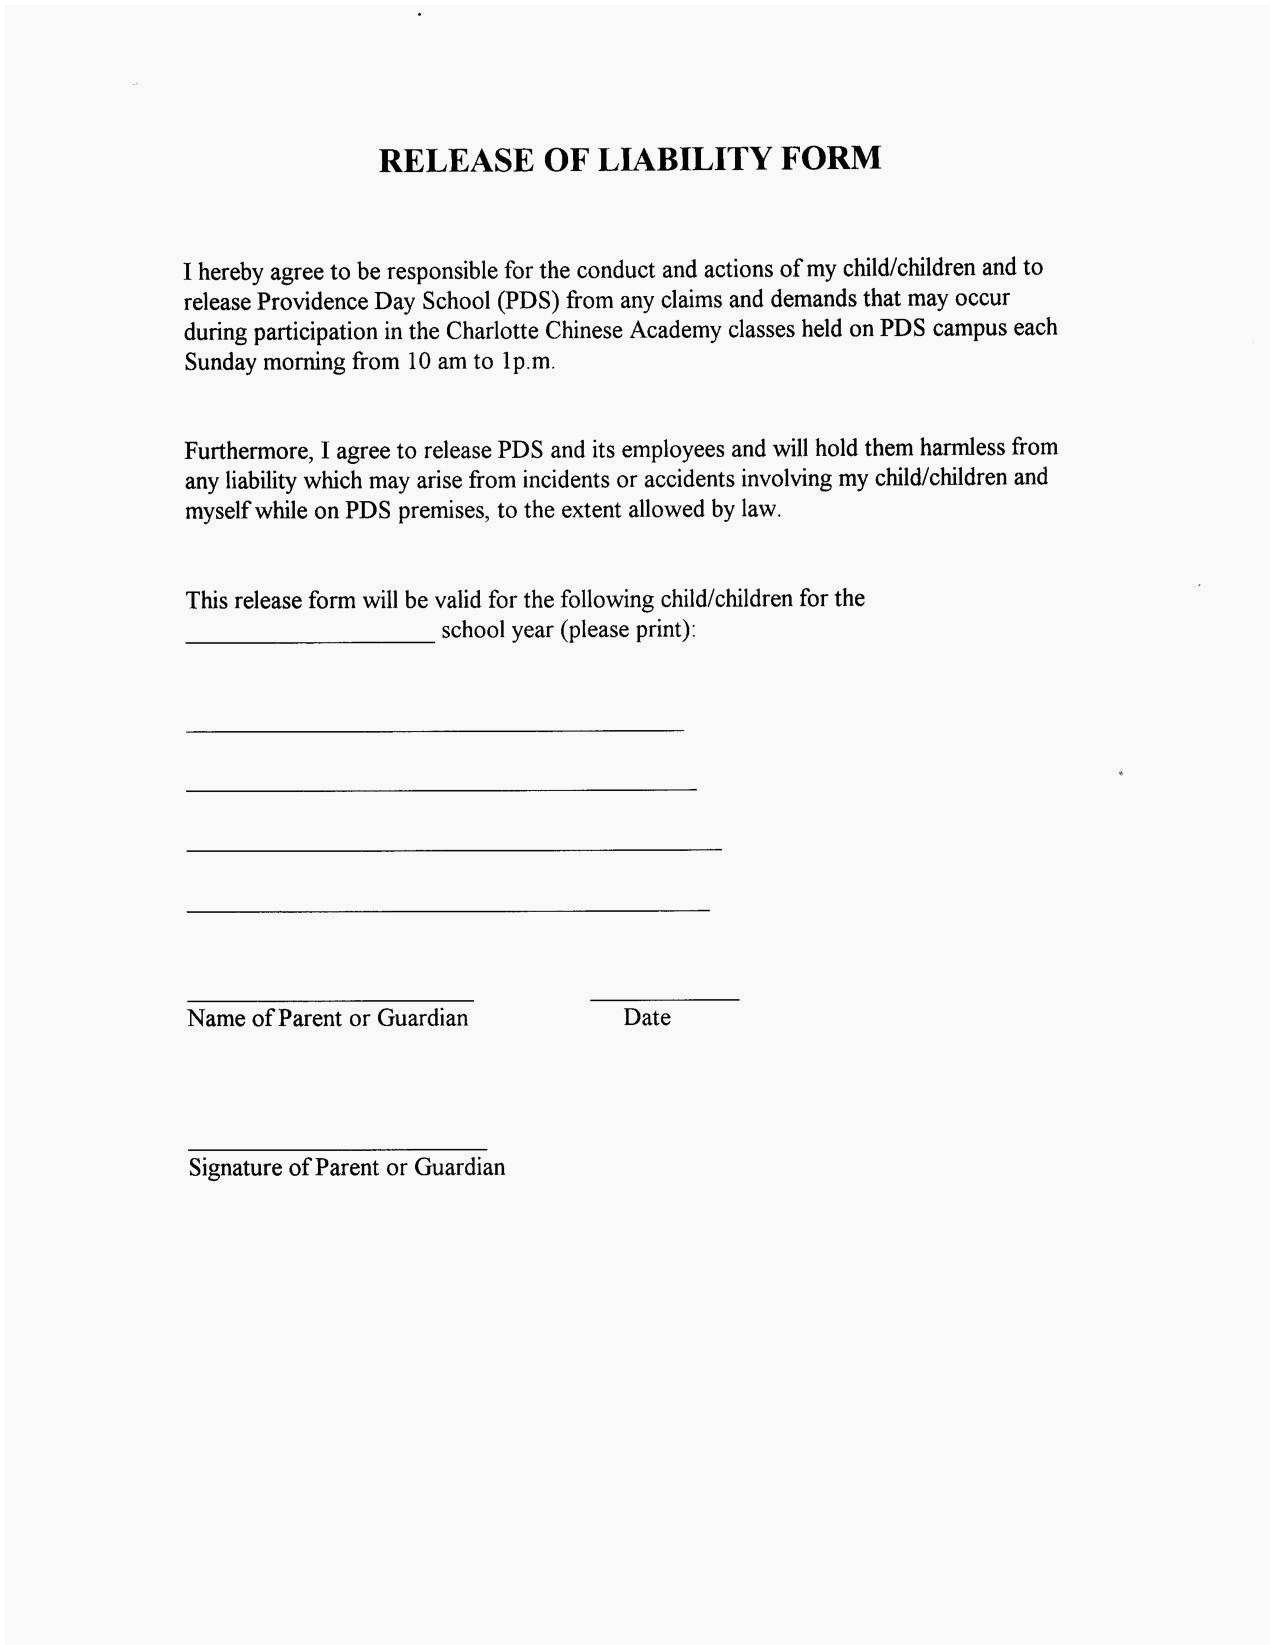 Modeling Agreement Contract Creative Equipment Agreement Form Employee 650841 Modeling